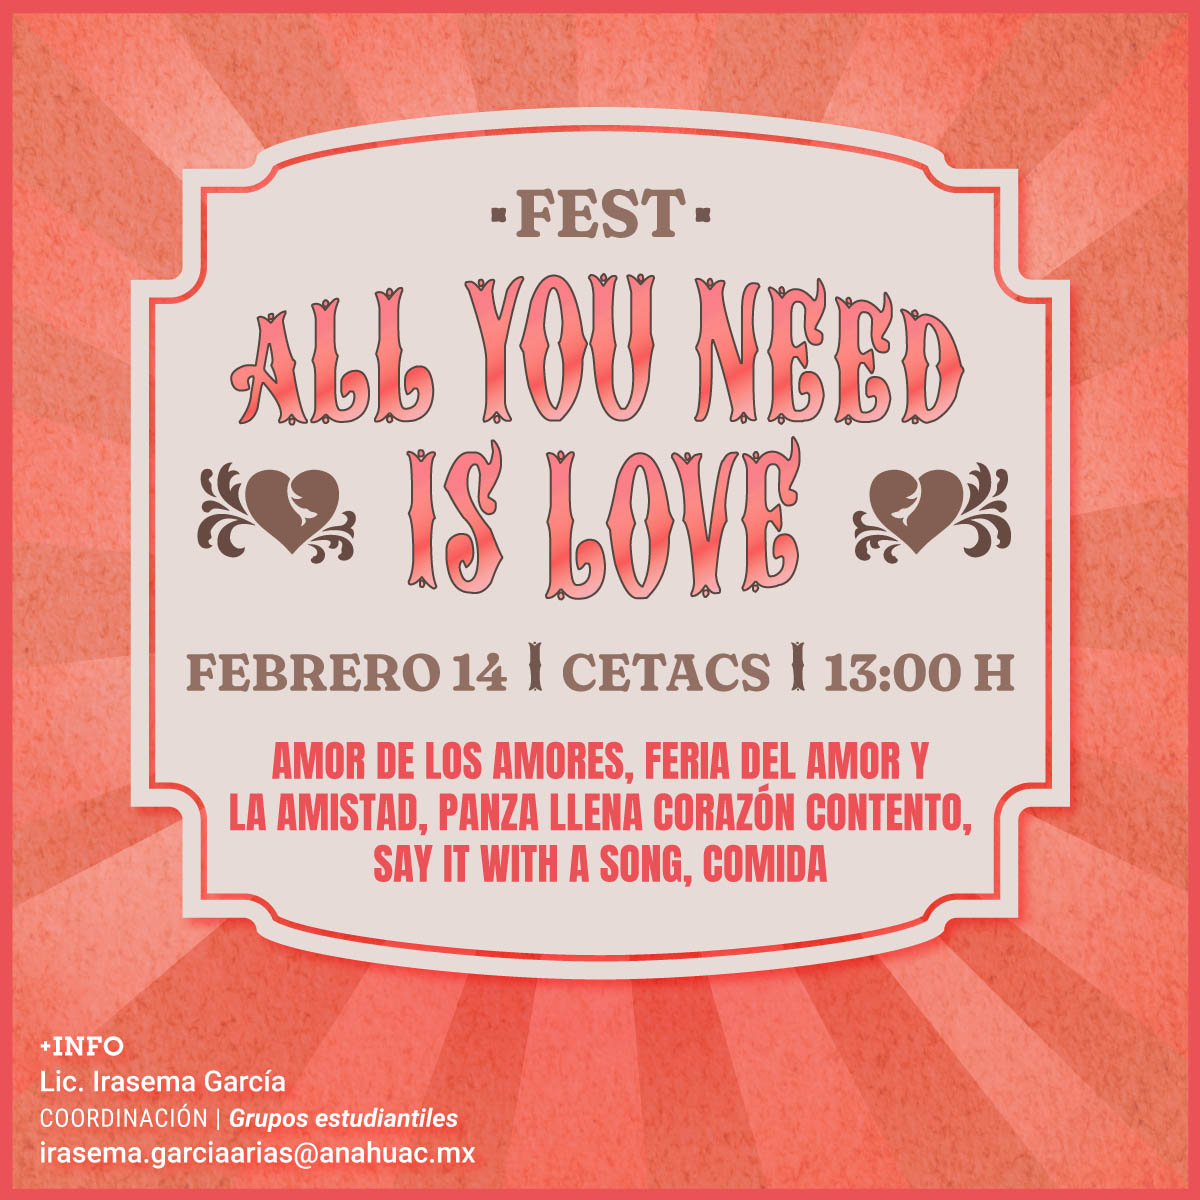 All You Need is Love Fest